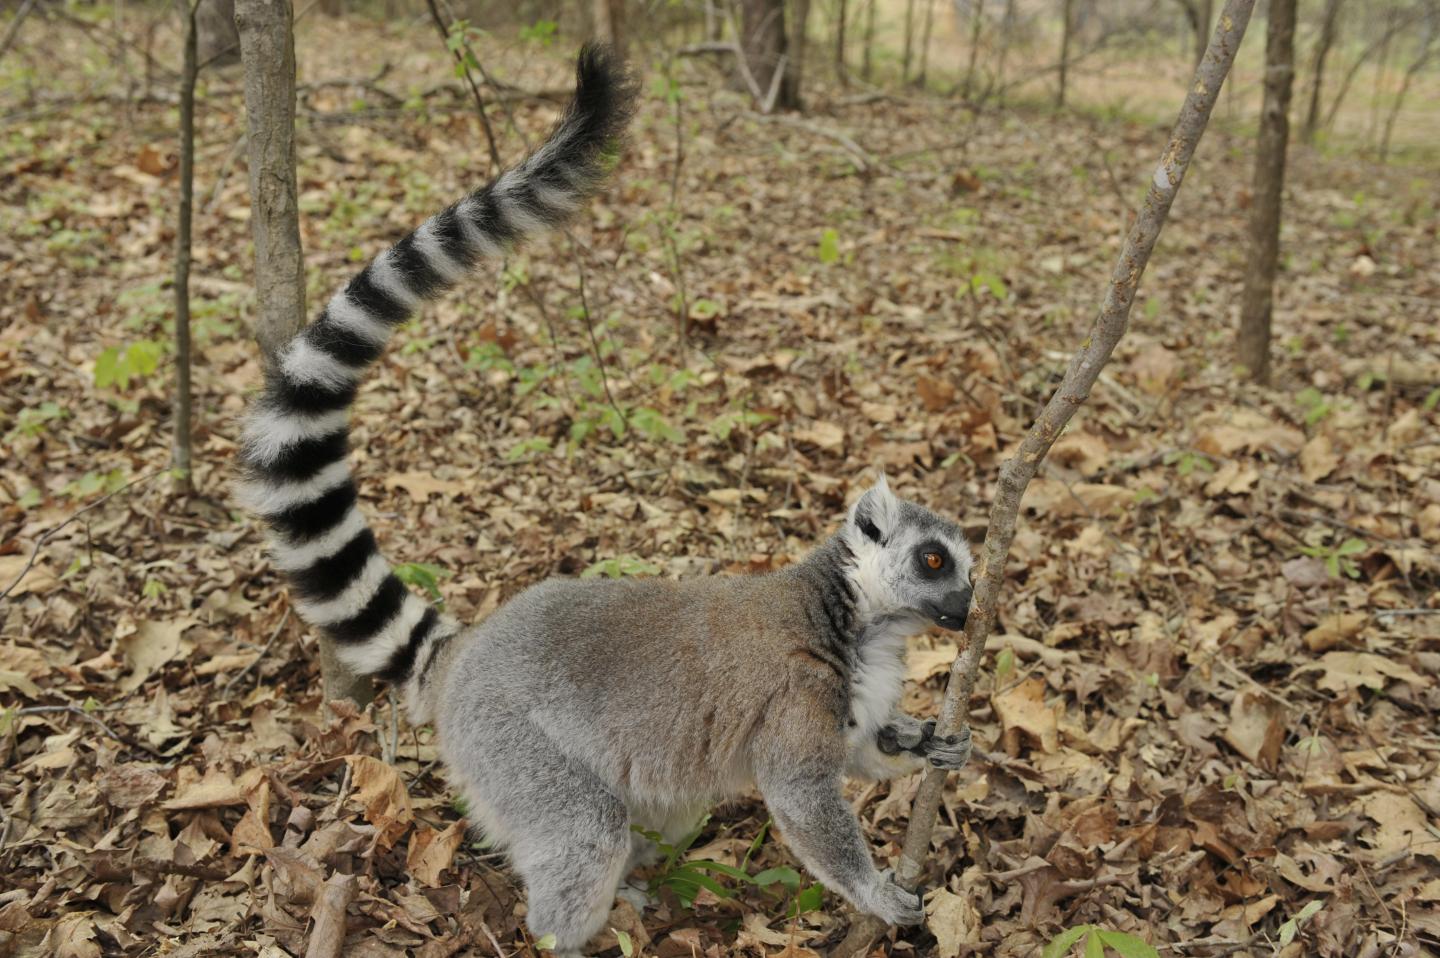 Male Lemurs Size Each Other up through Scent